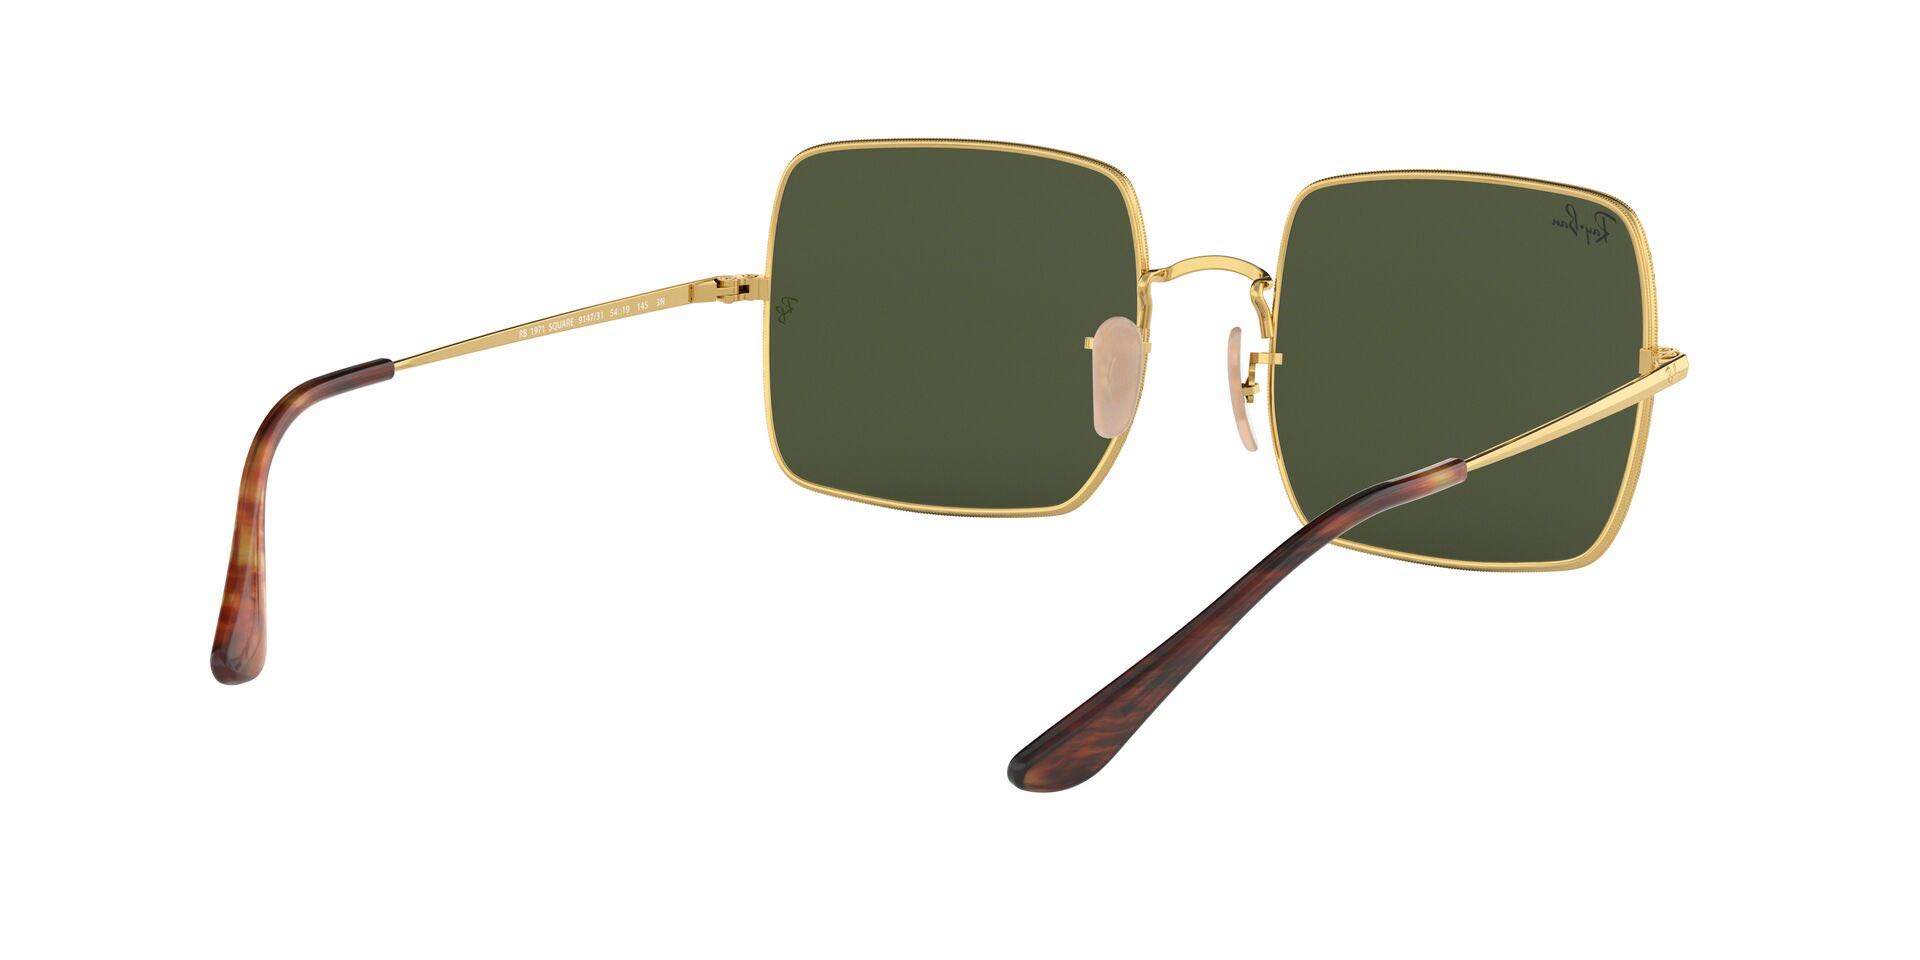 Sunglass Ray-Ban Square Classic Or RB1971 9147/31 54-19 | Visiofactory